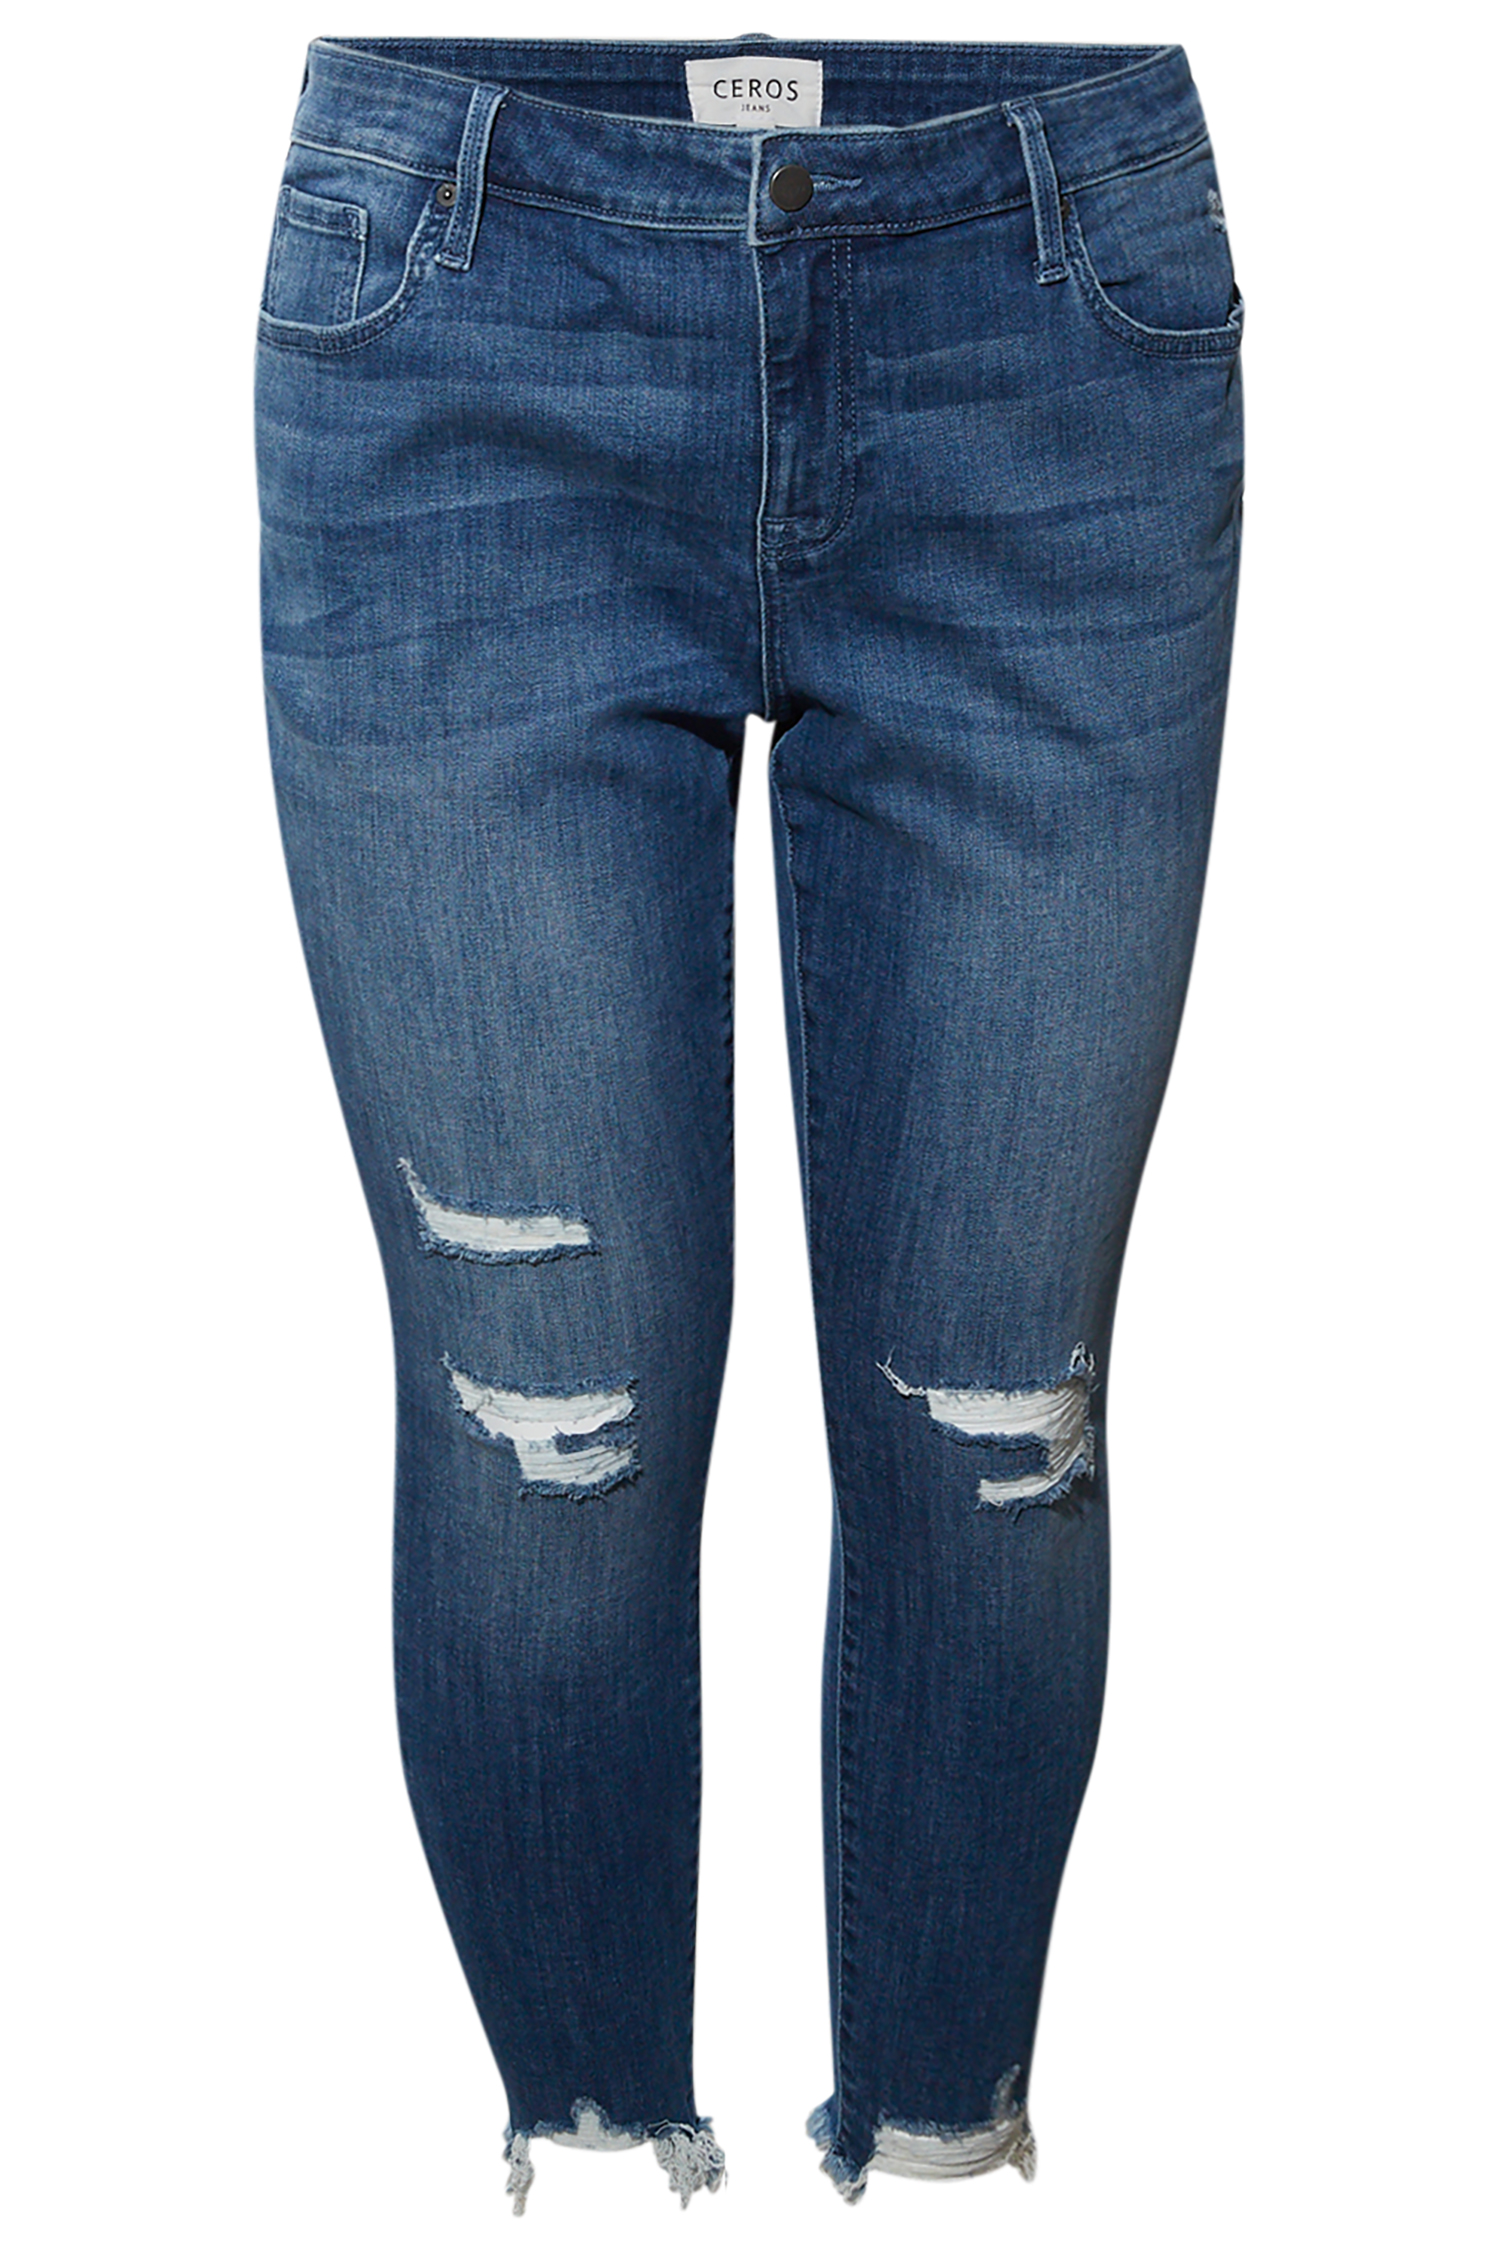 Ceros High Rise Distressed Ankle Jean